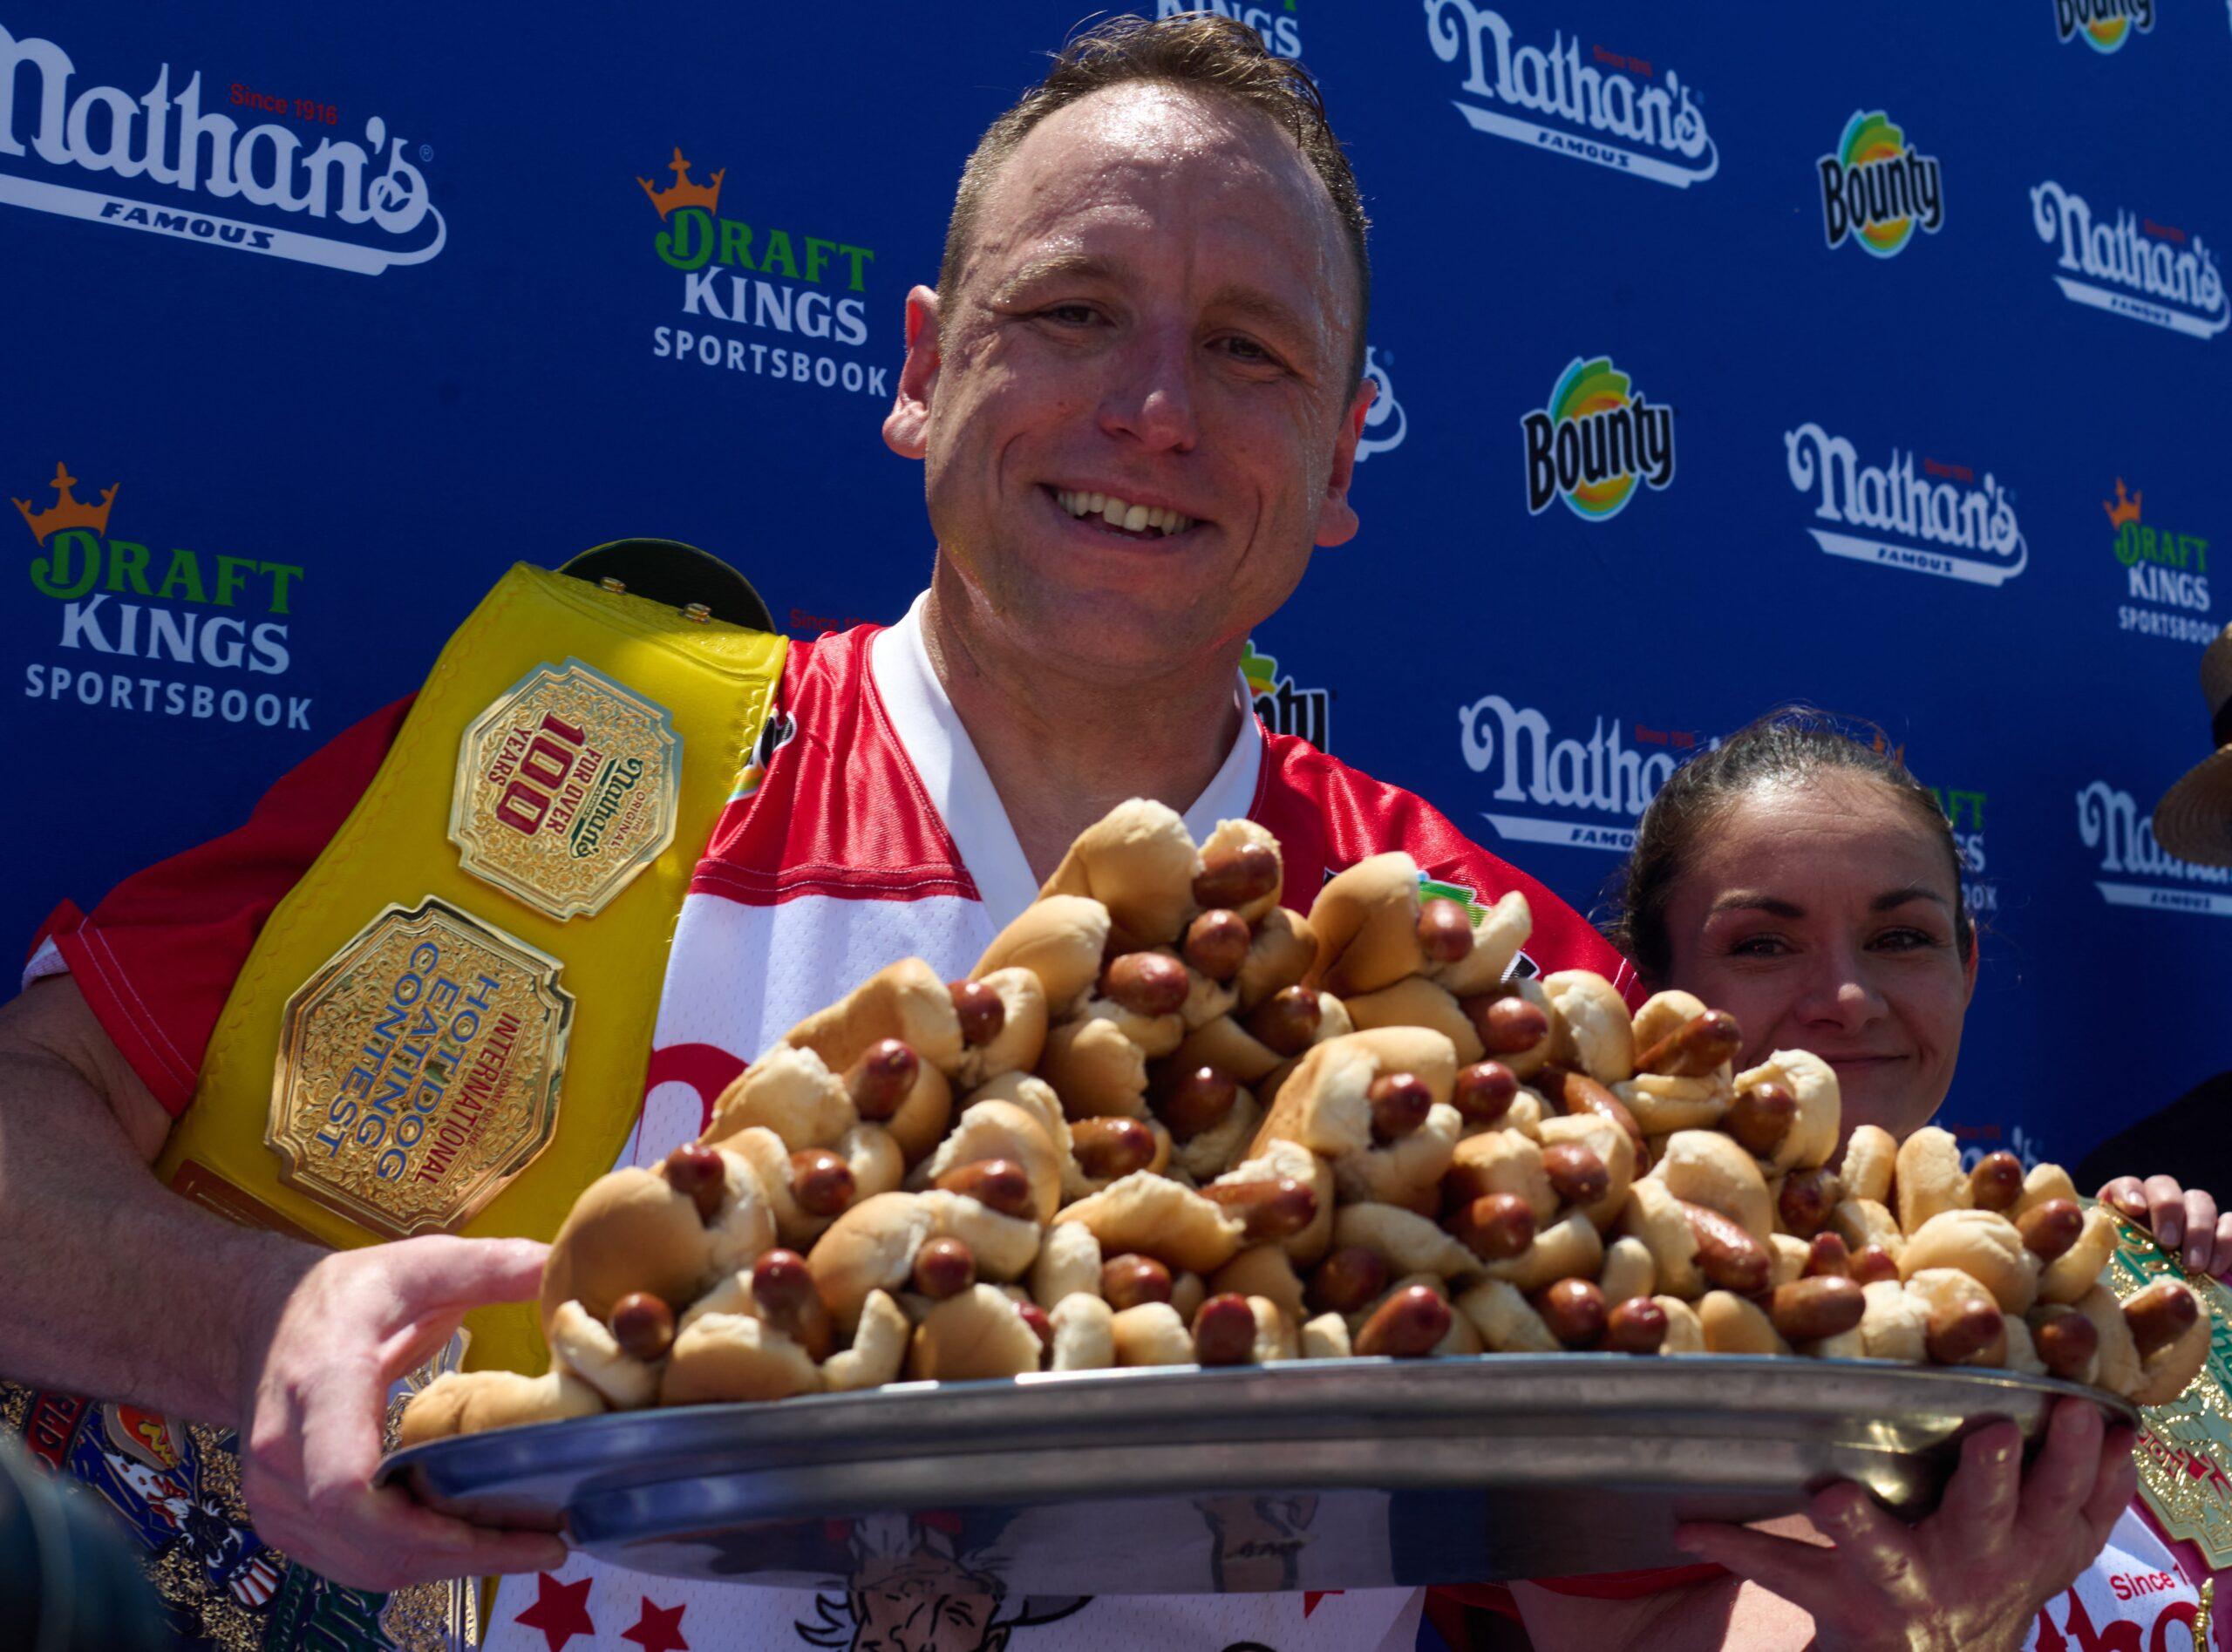 Joey Chestnut holding a plate of hot dogs